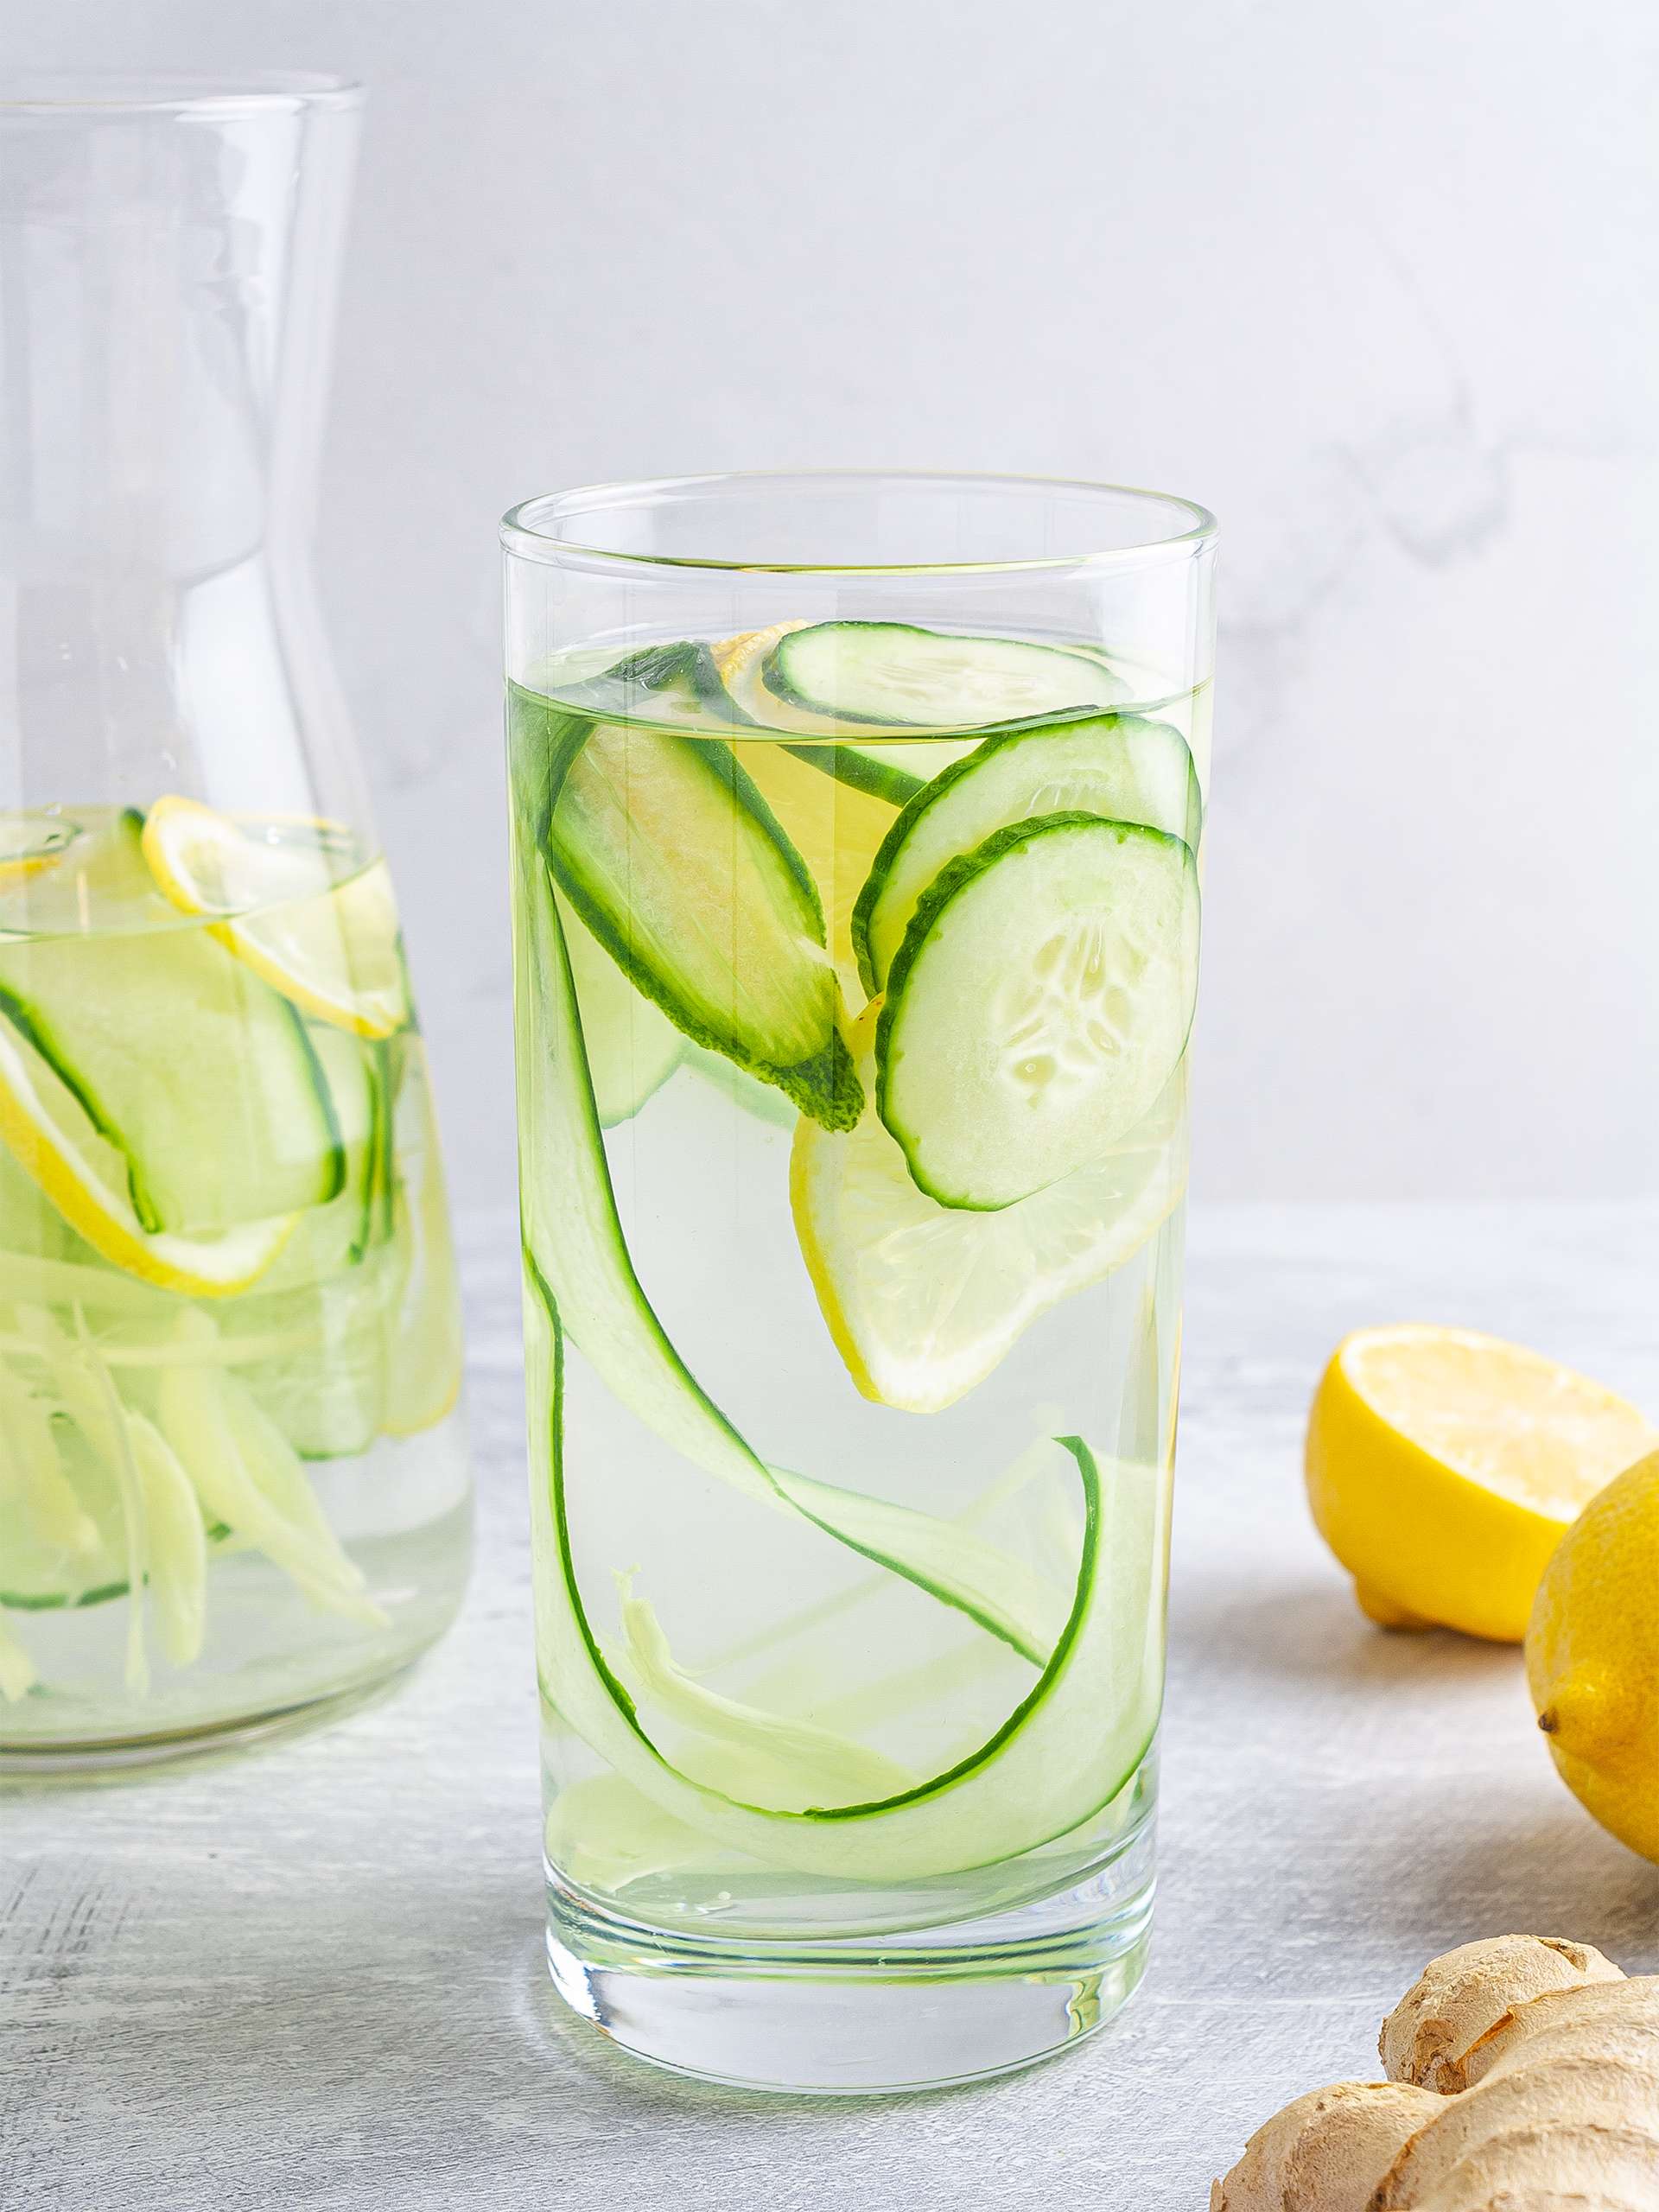 Cucumber ginger lemon water in a glass